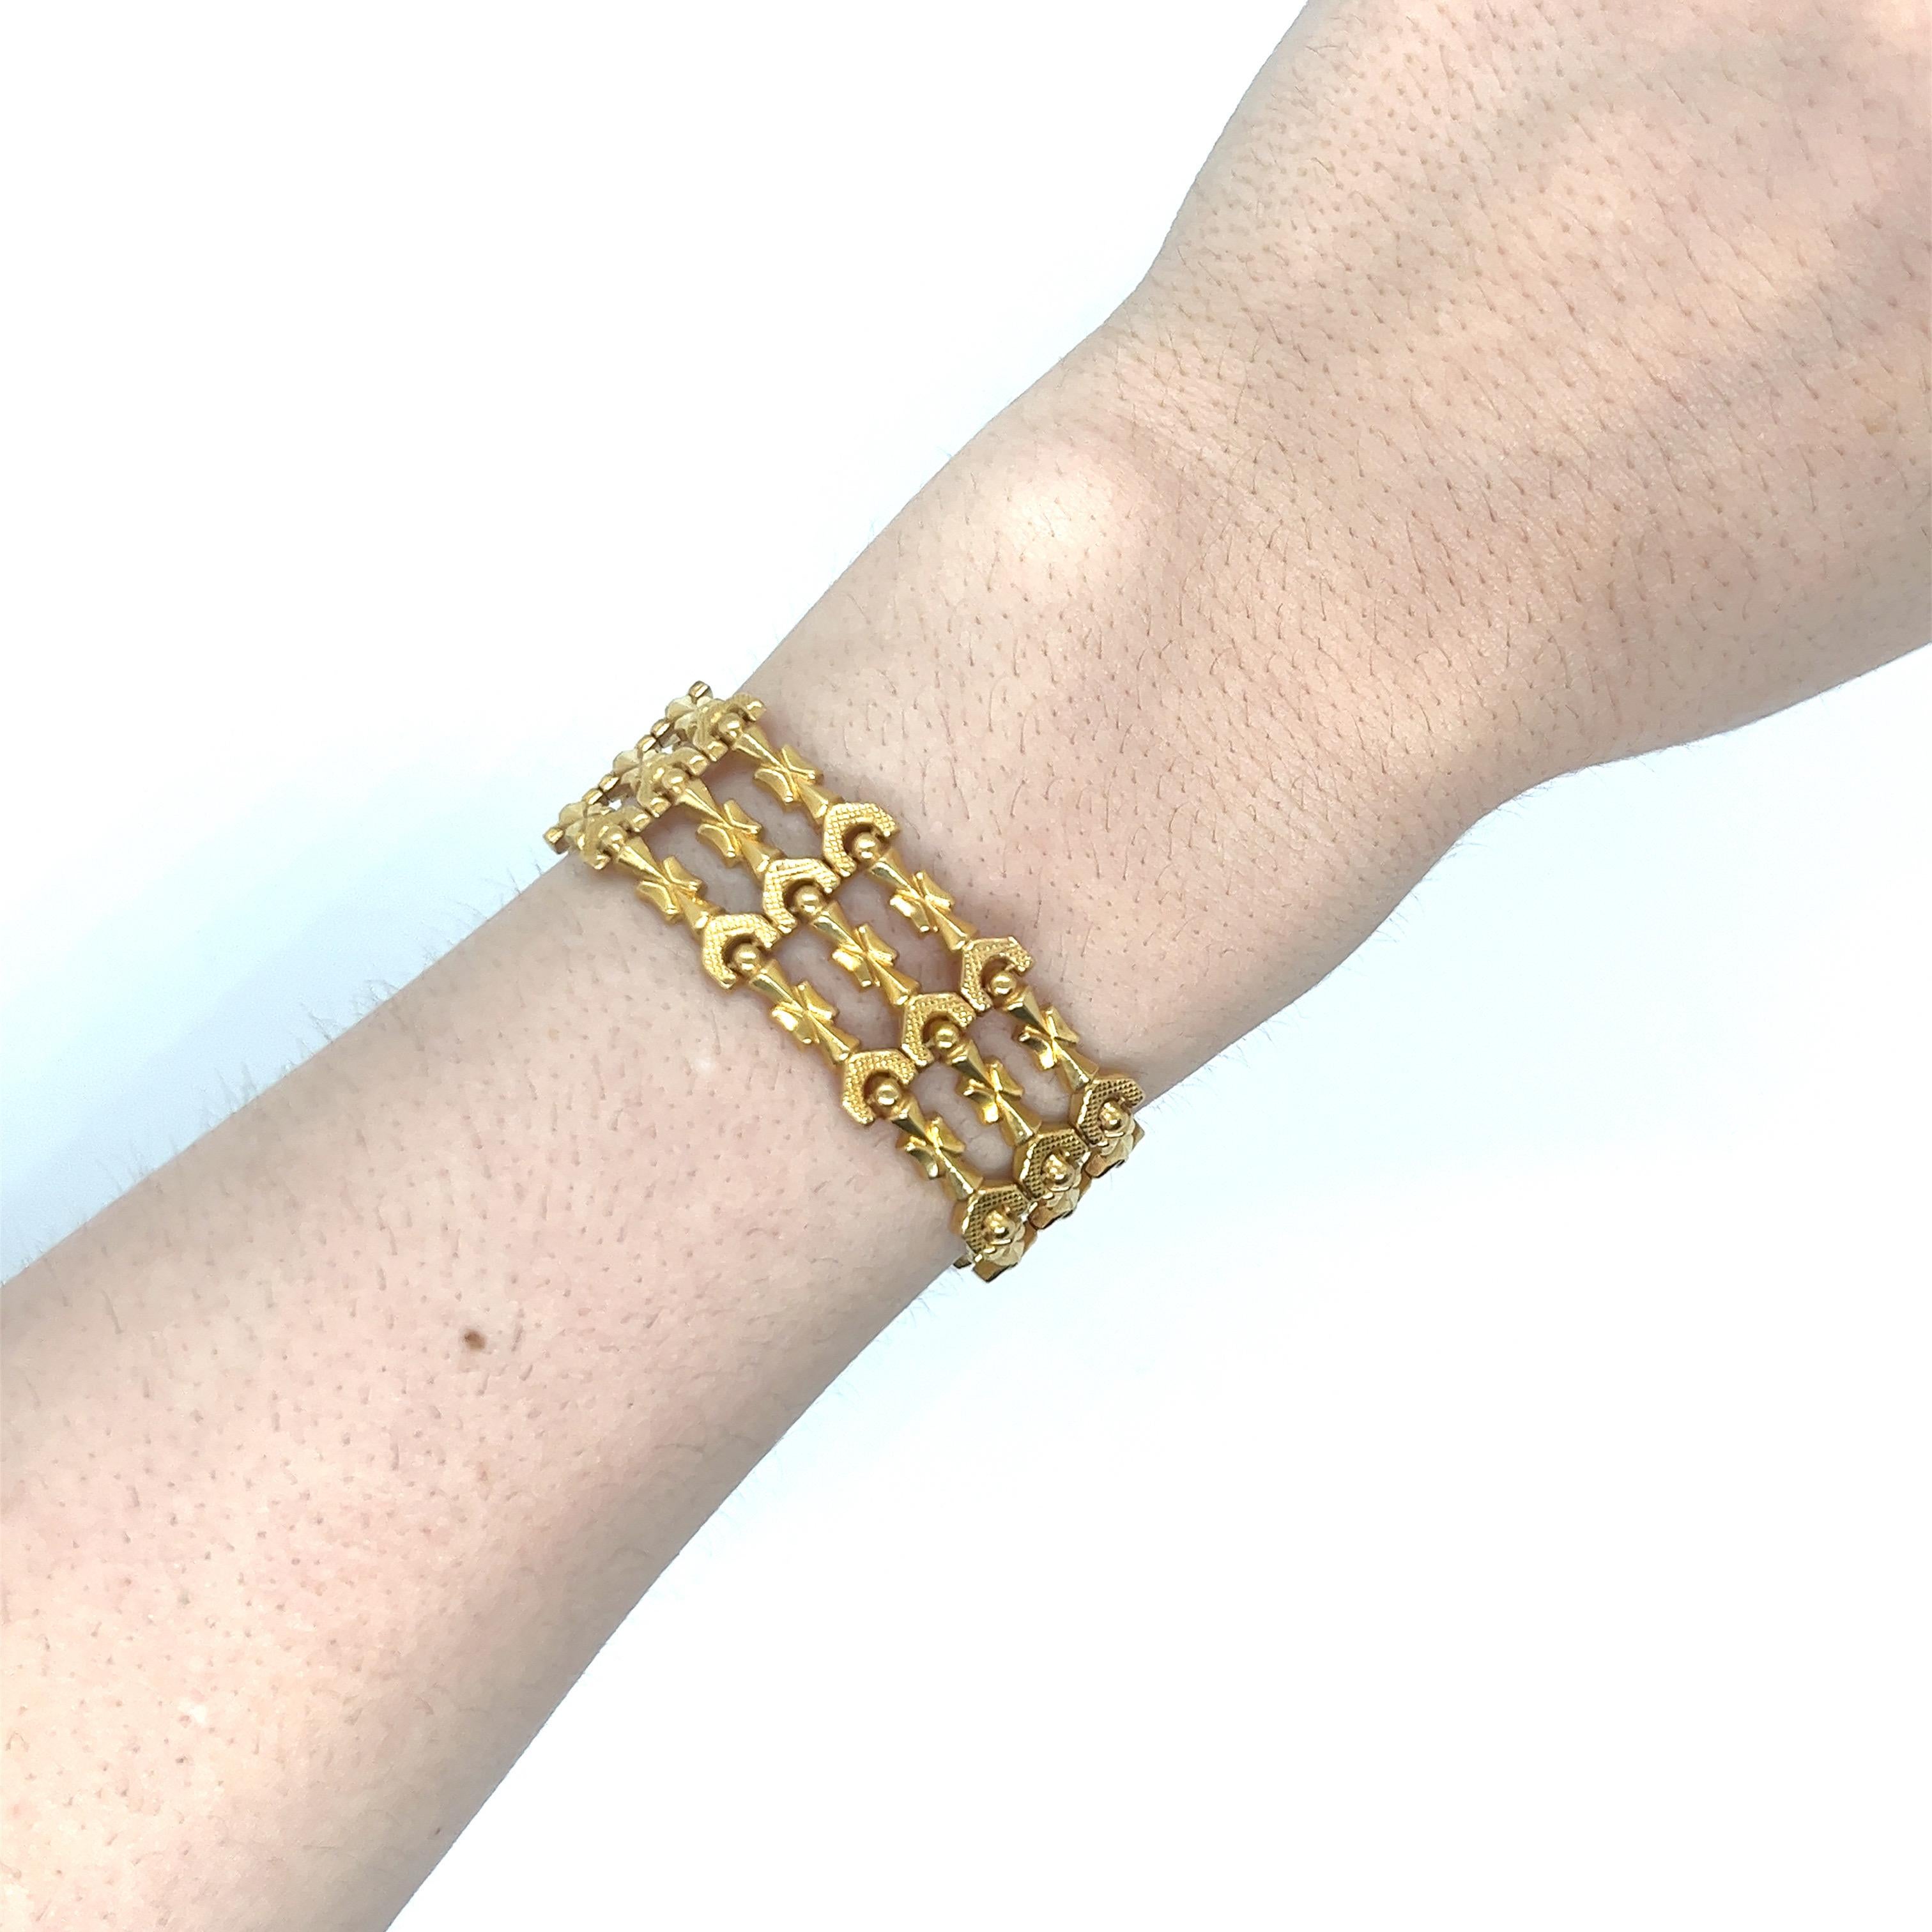 Vintage 18k Yellow Gold 3 Row Link Bracelet In Good Condition For Sale In Boston, MA